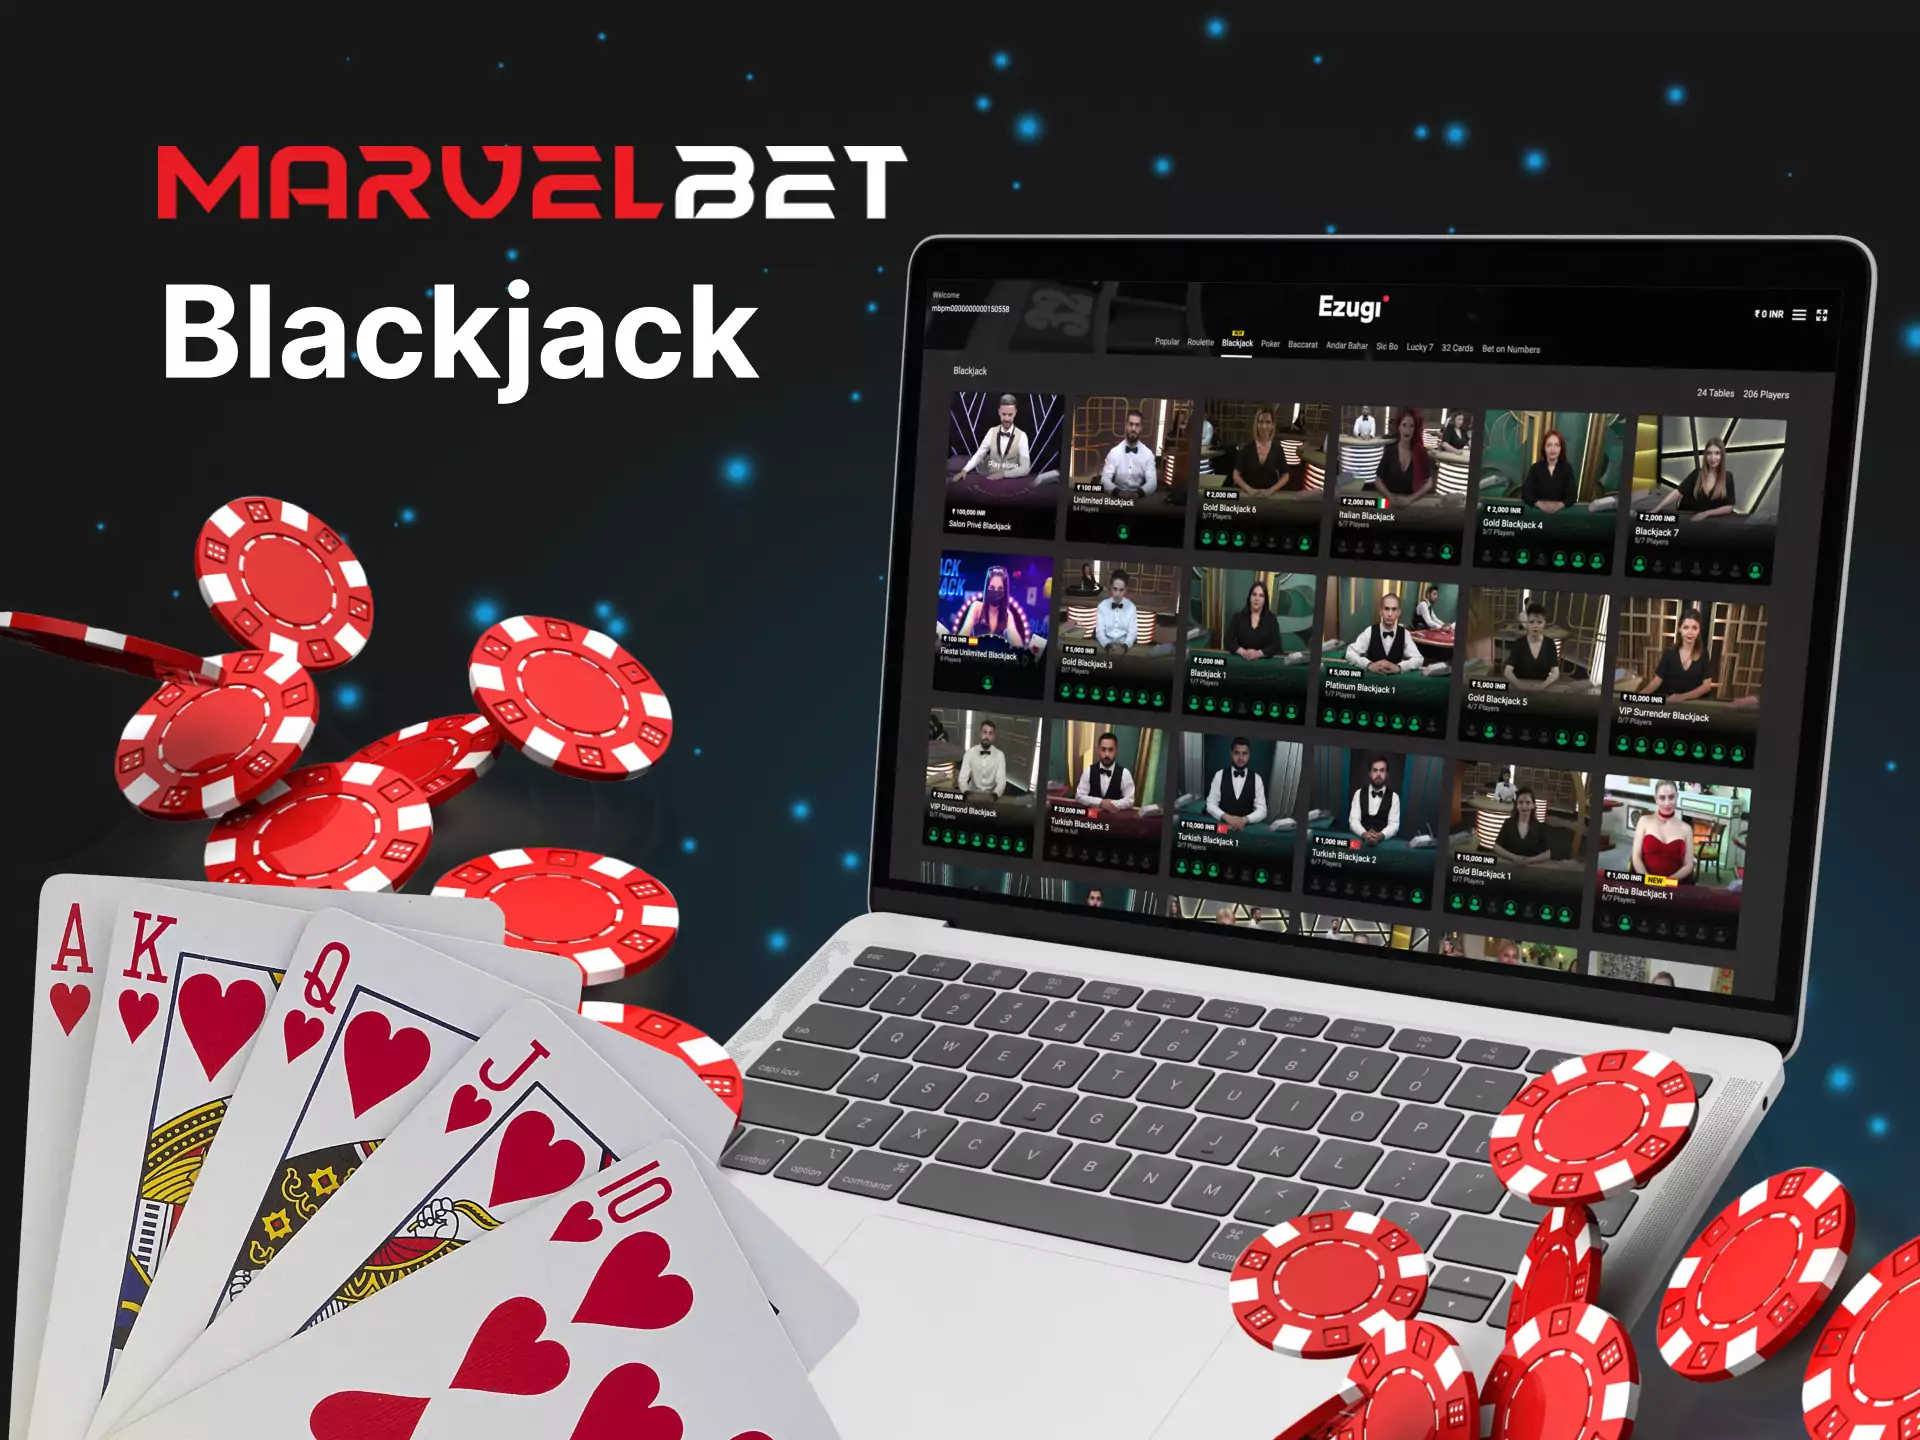 You can play the blackjack game in the Marvelbet Casino.